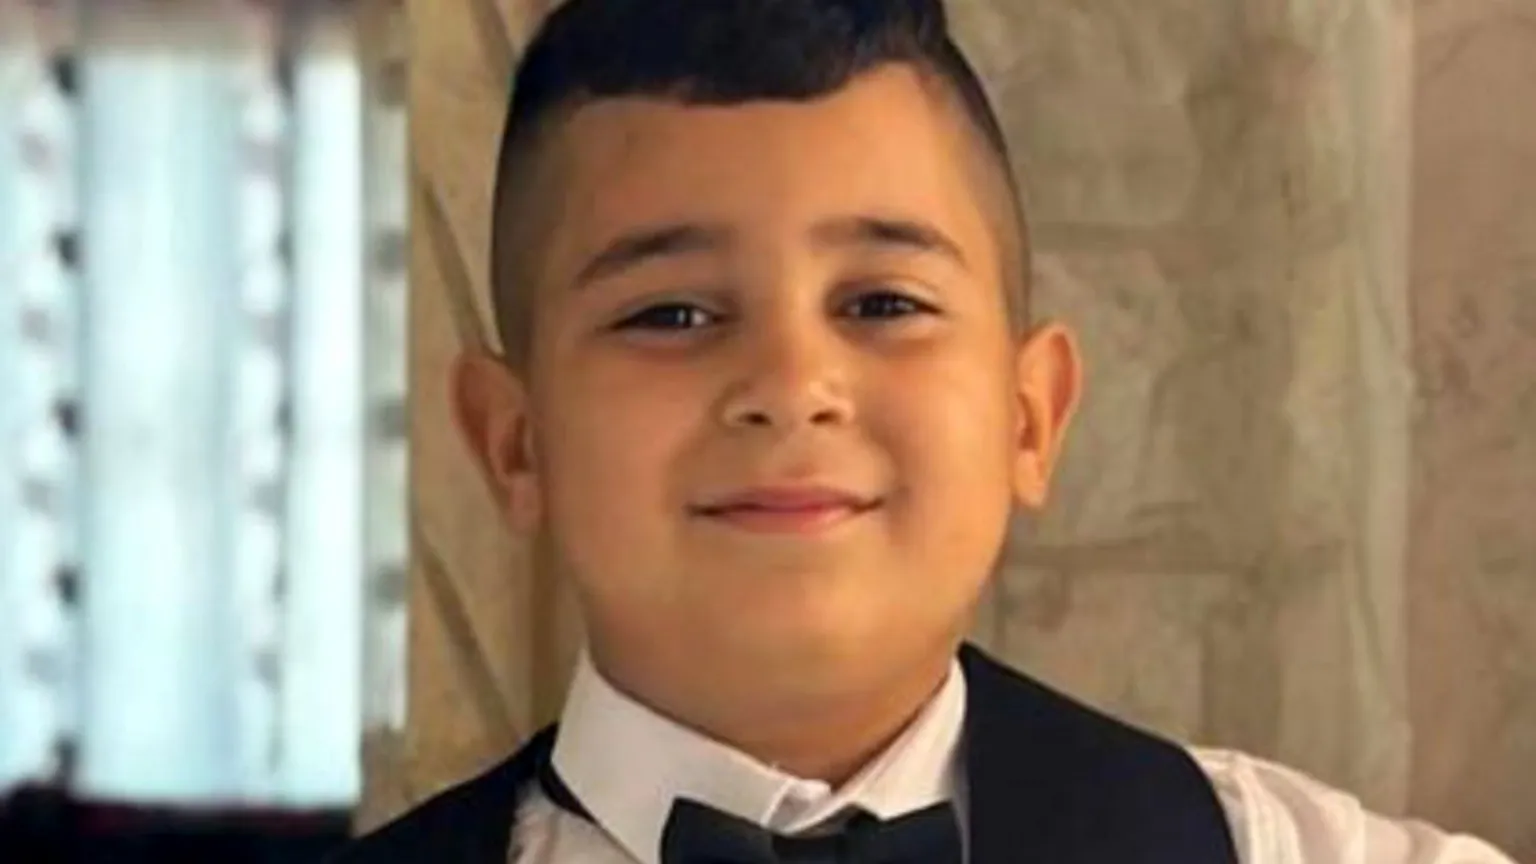 Israel accused of possible war crime over killing of West Bank boy (bbc.com)